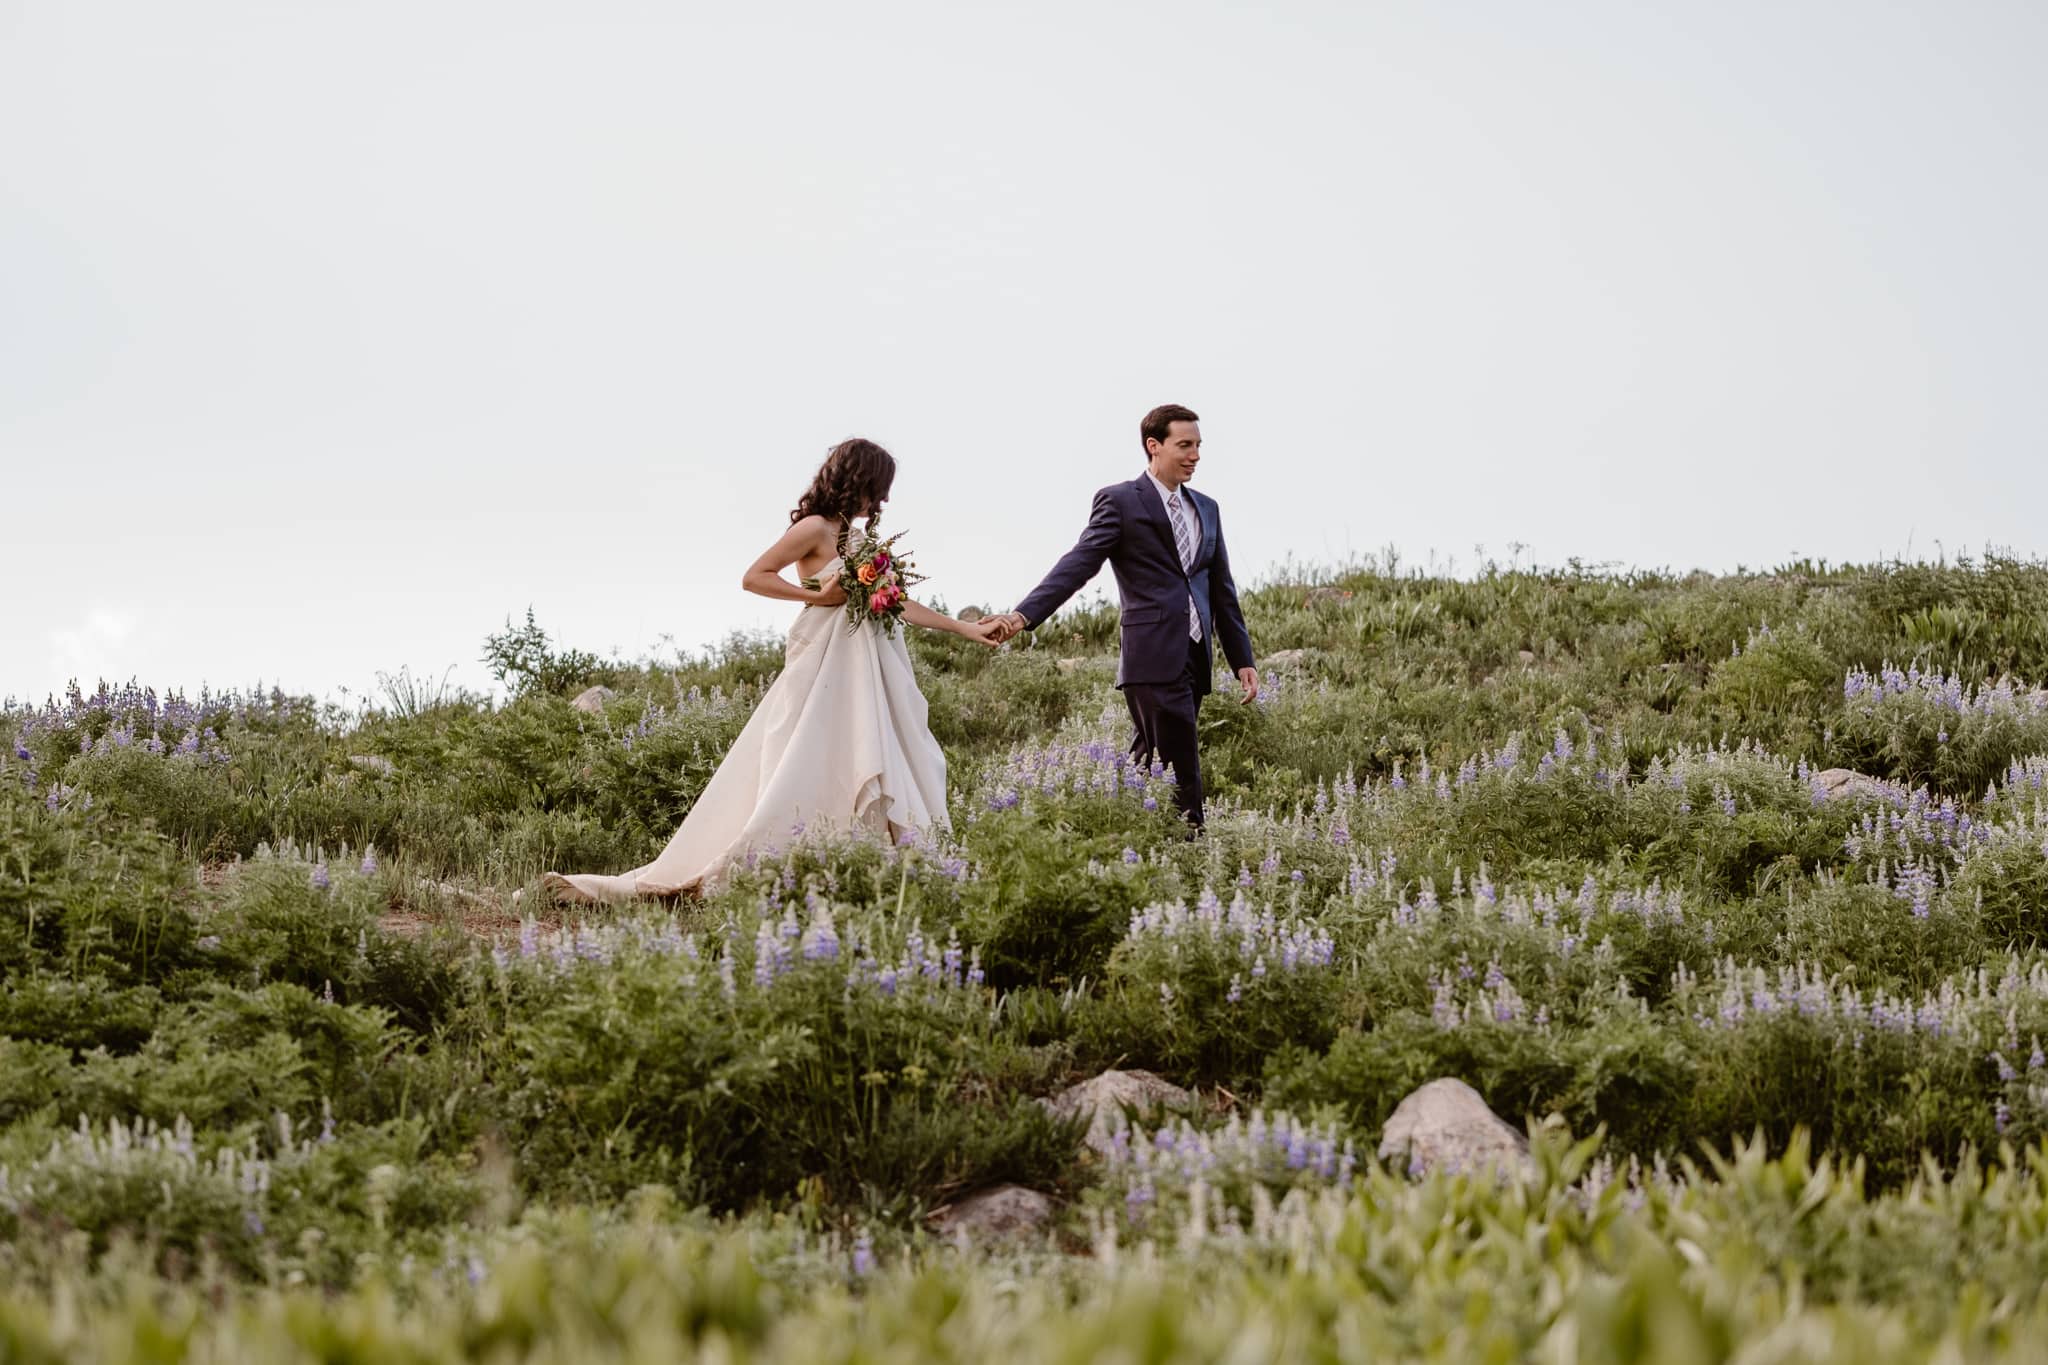 8 Reasons Why You Should Plan a Weekday Elopement